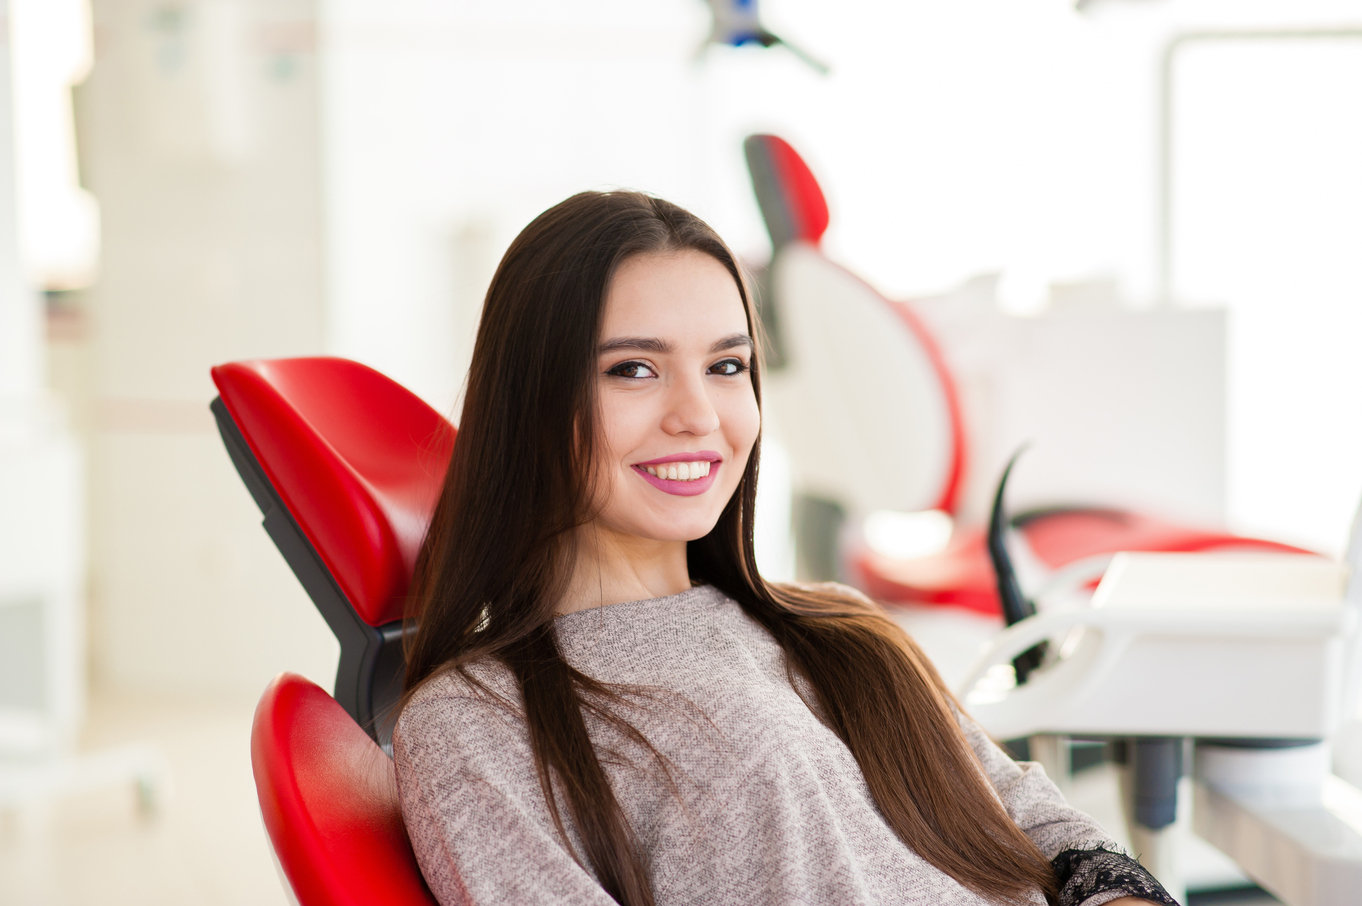 a woman with a bright smile sitting on a dental chair